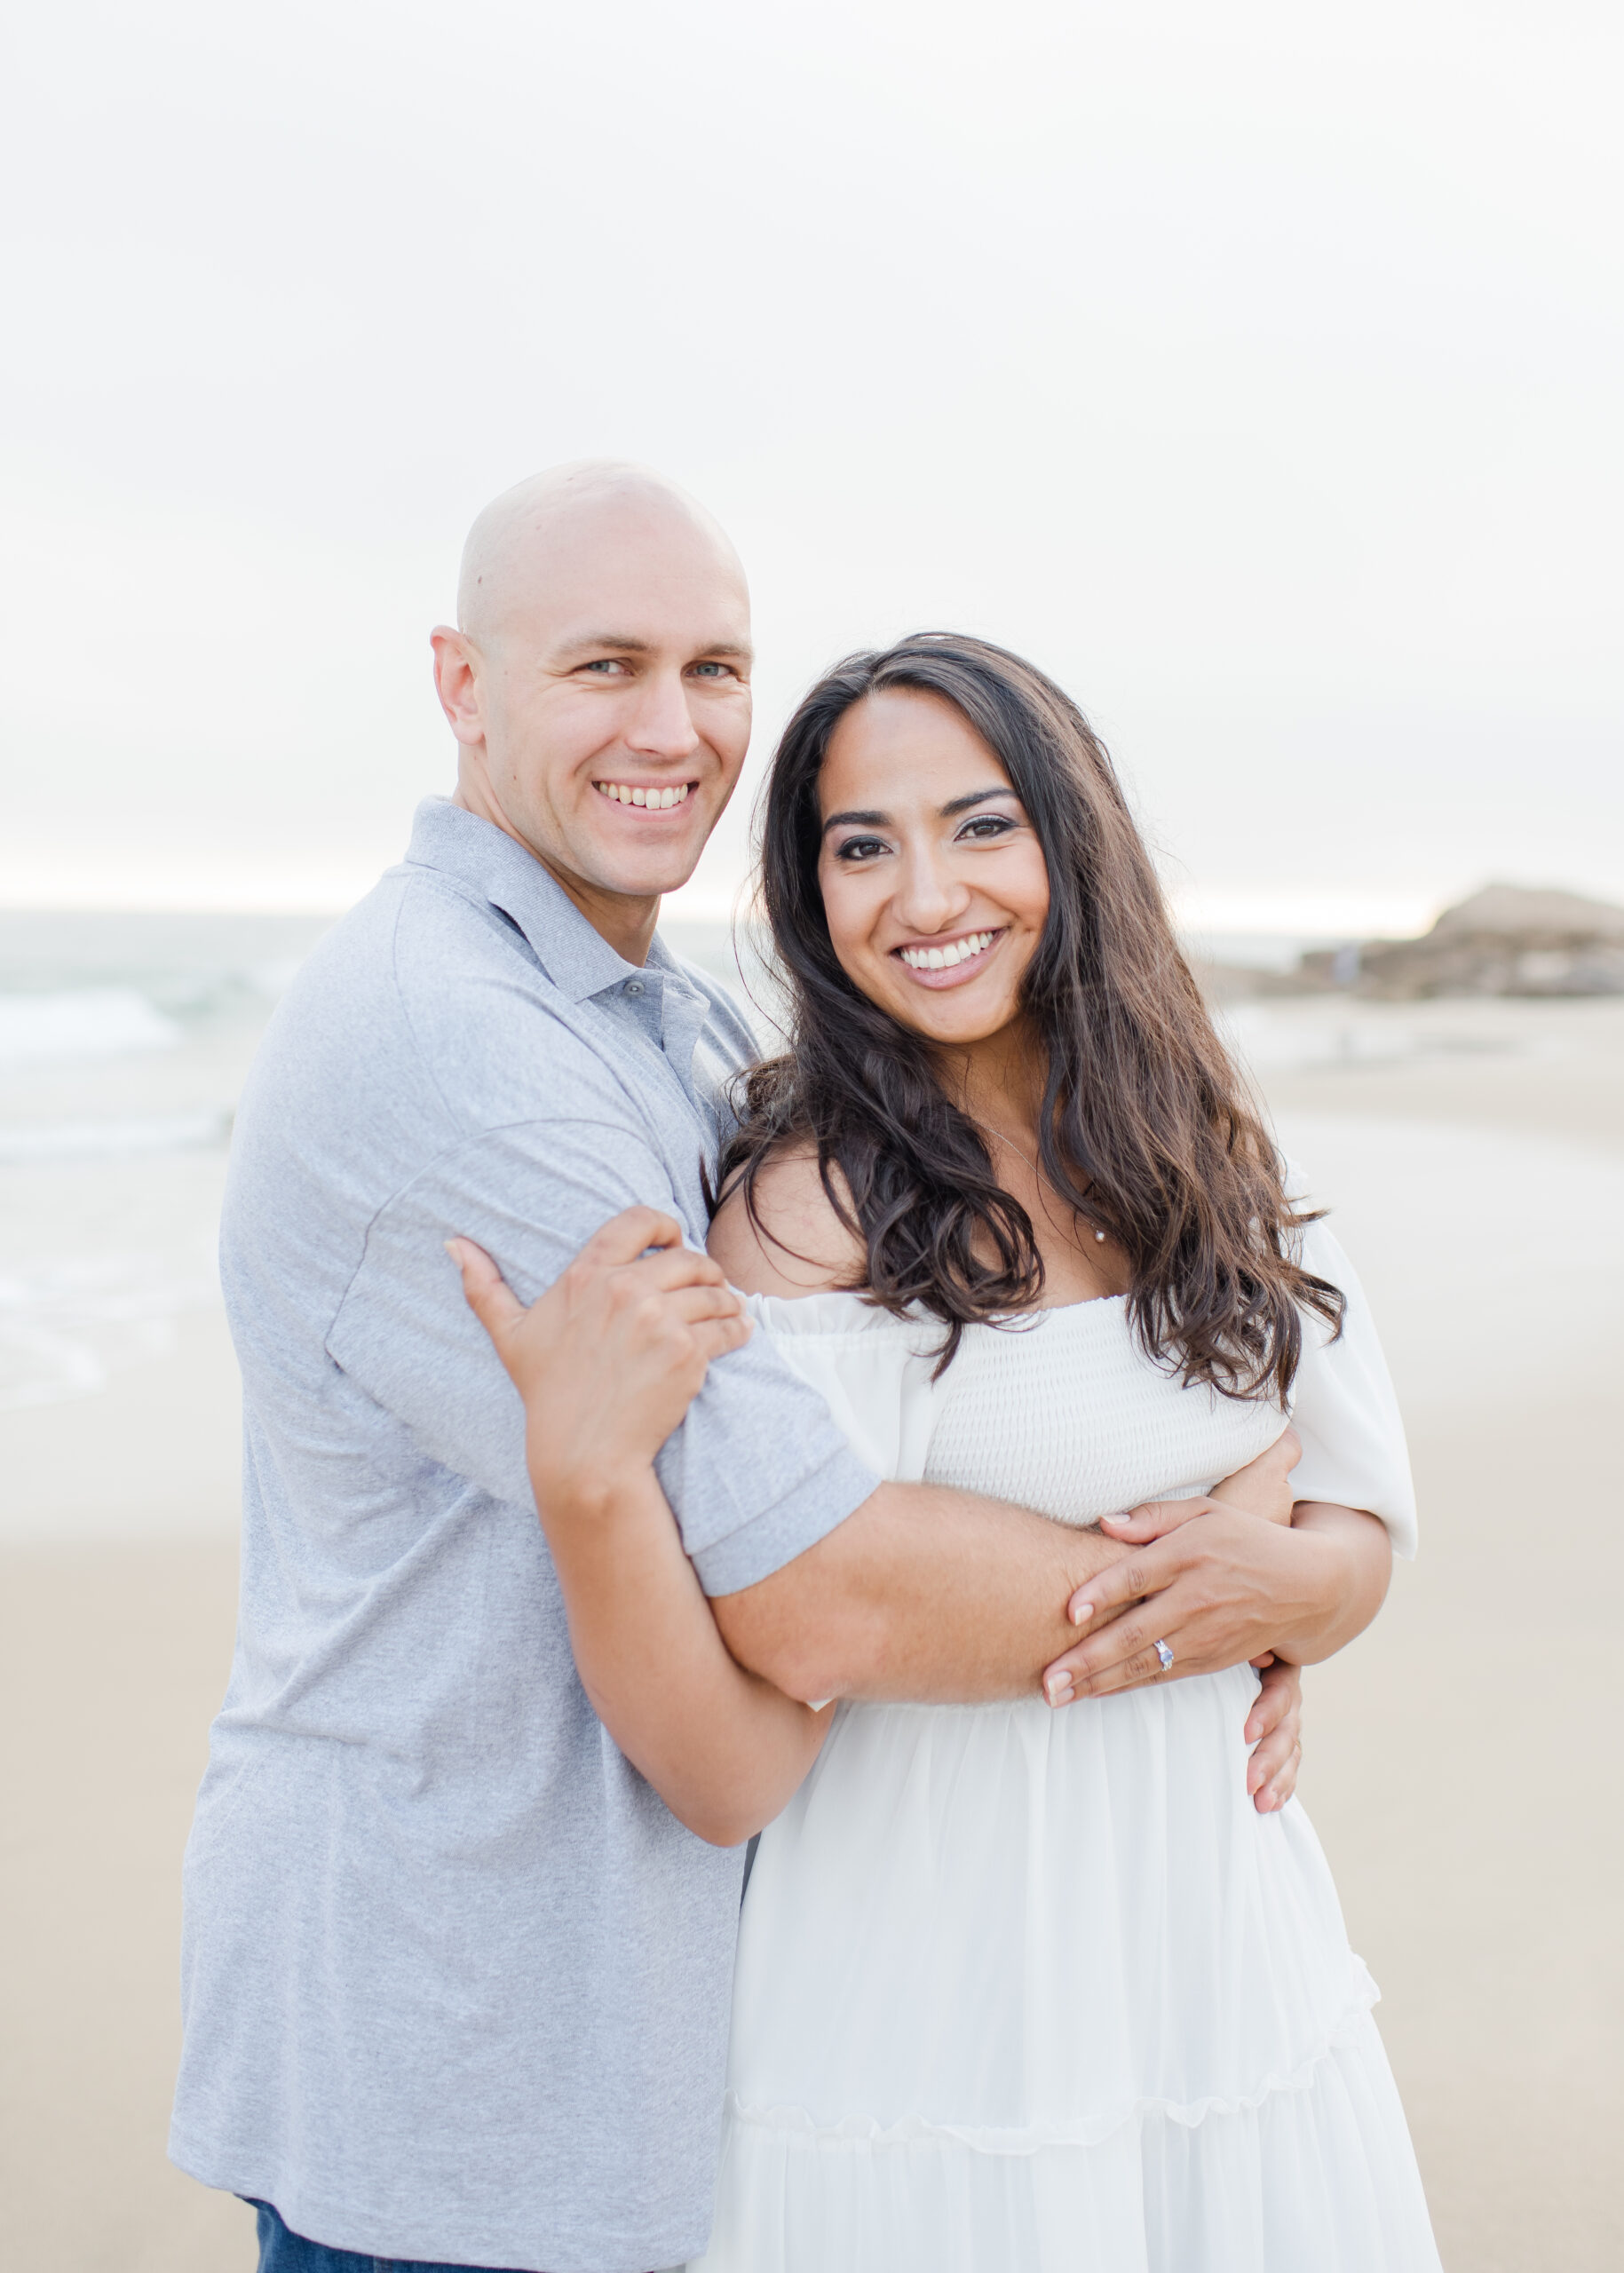 Crystal Cove Beach Engagement Session